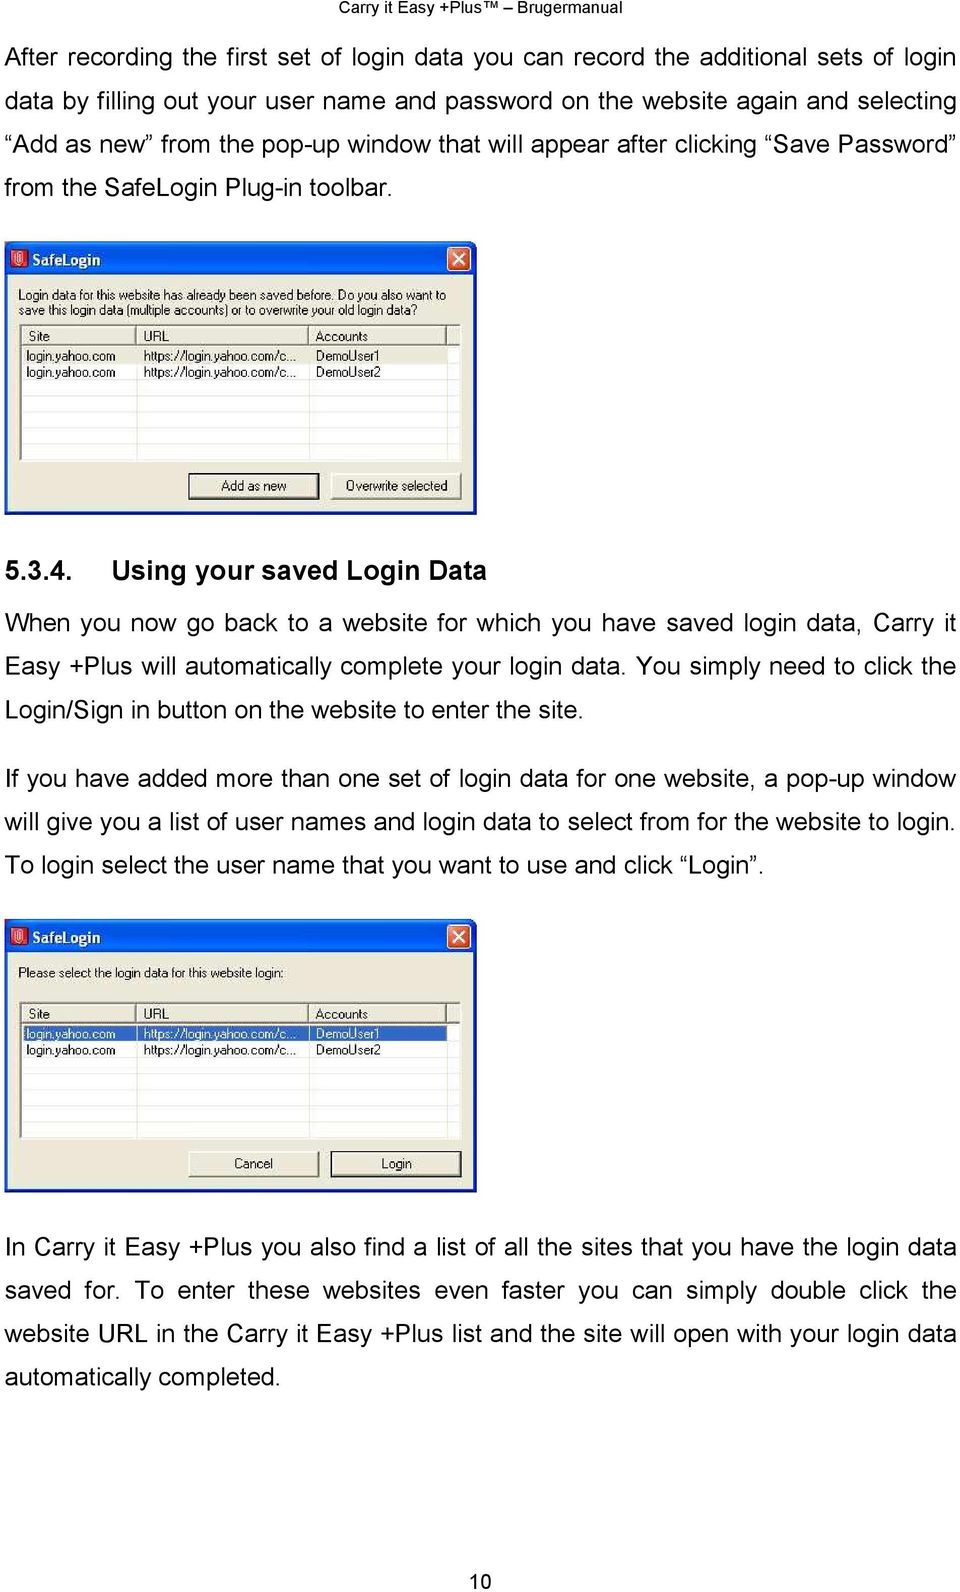 Using your saved Login Data When you now go back to a website for which you have saved login data, Carry it Easy +Plus will automatically complete your login data.